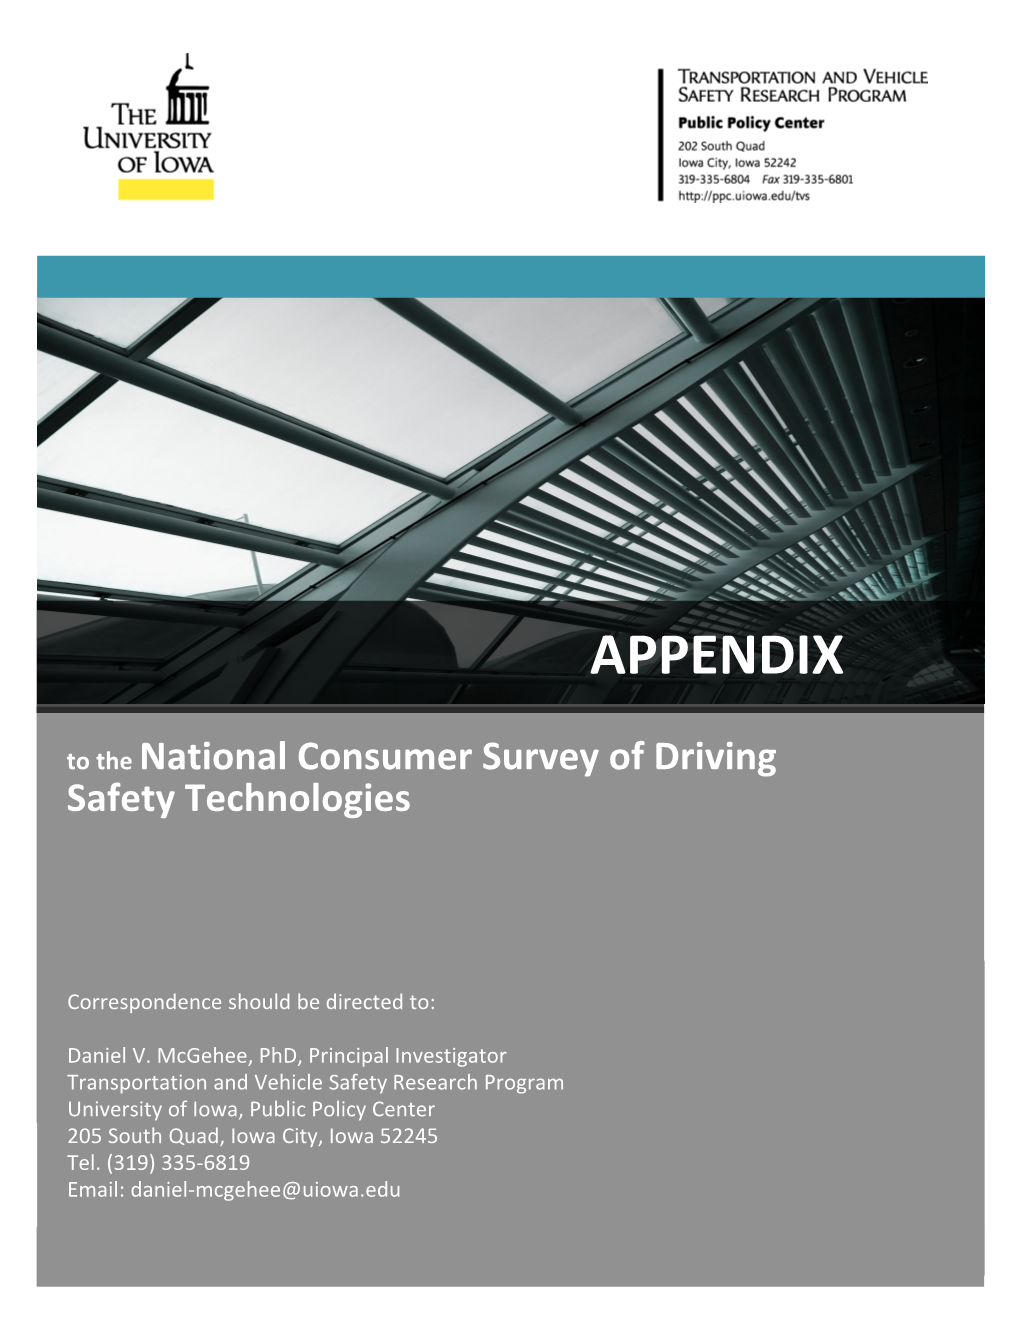 APPENDIX to the National Consumer Survey of Driving Safety Technologies